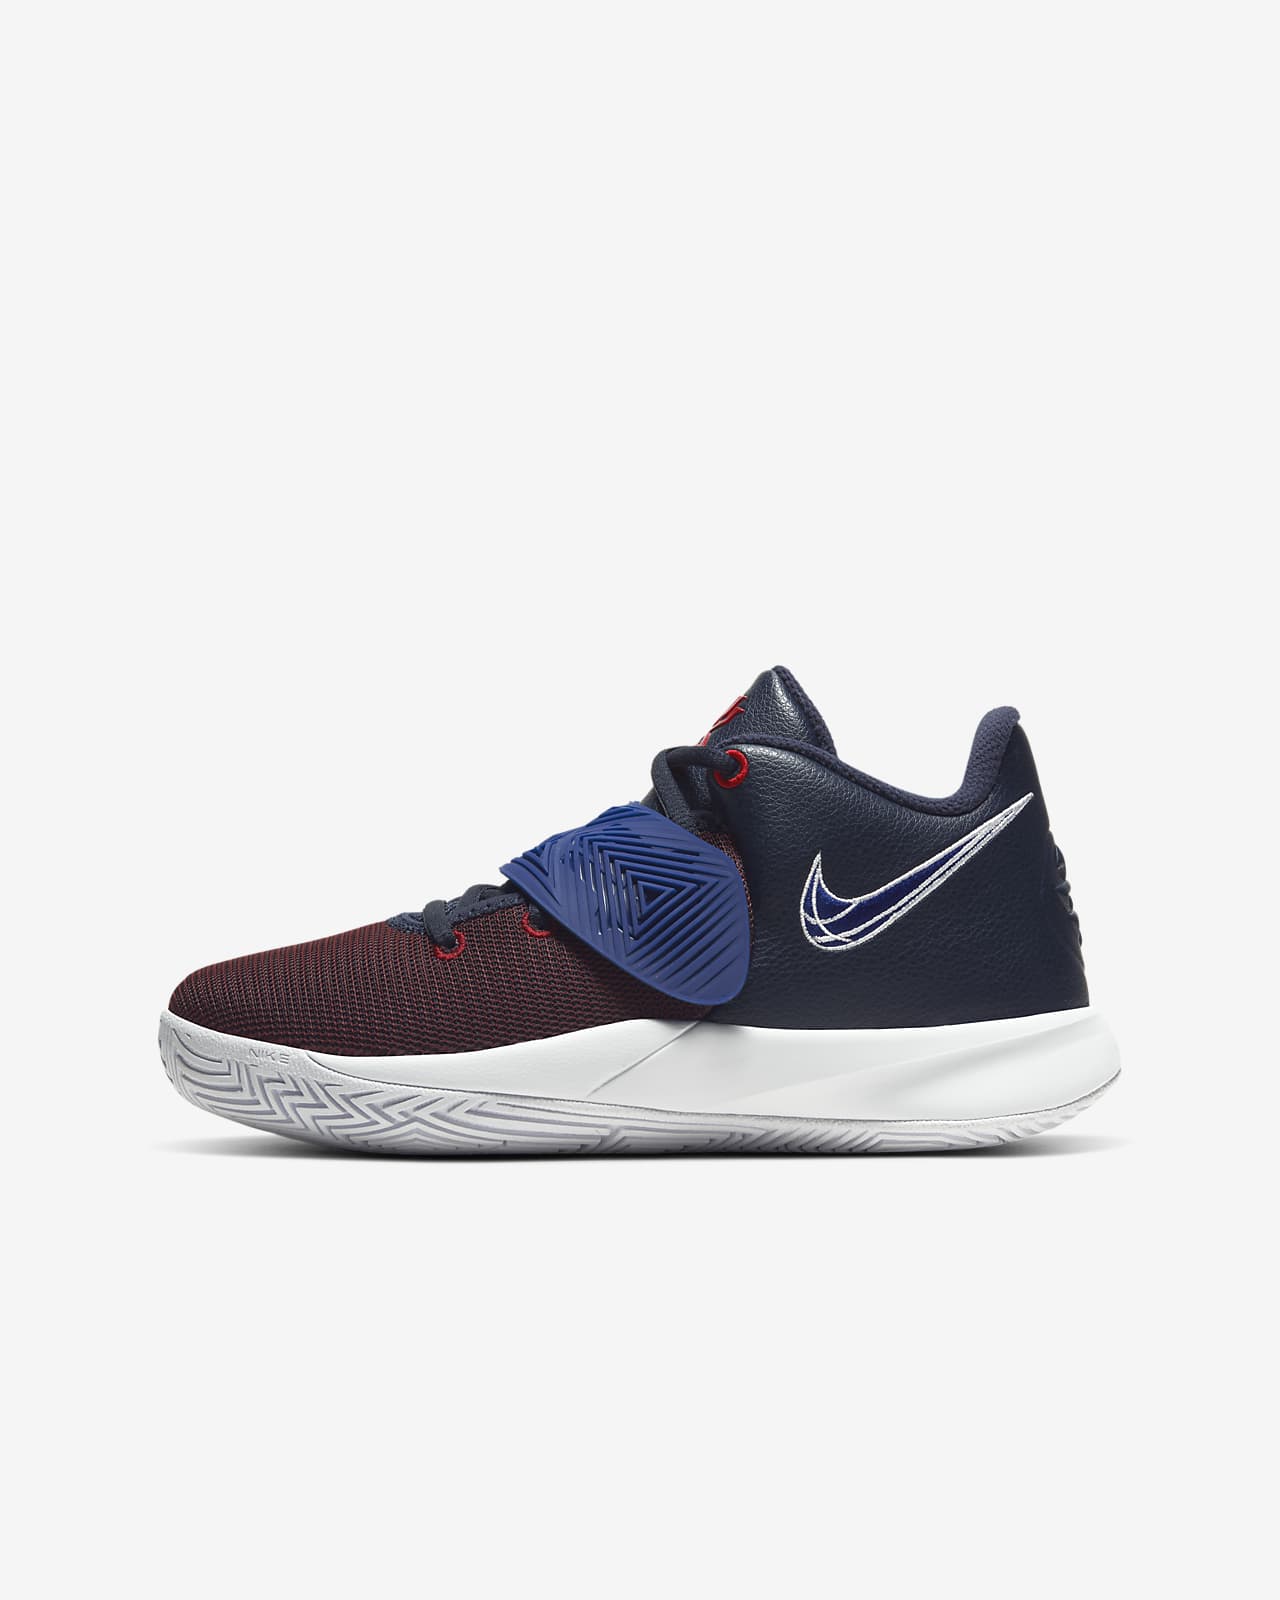 kyrie 3 shoes price philippines